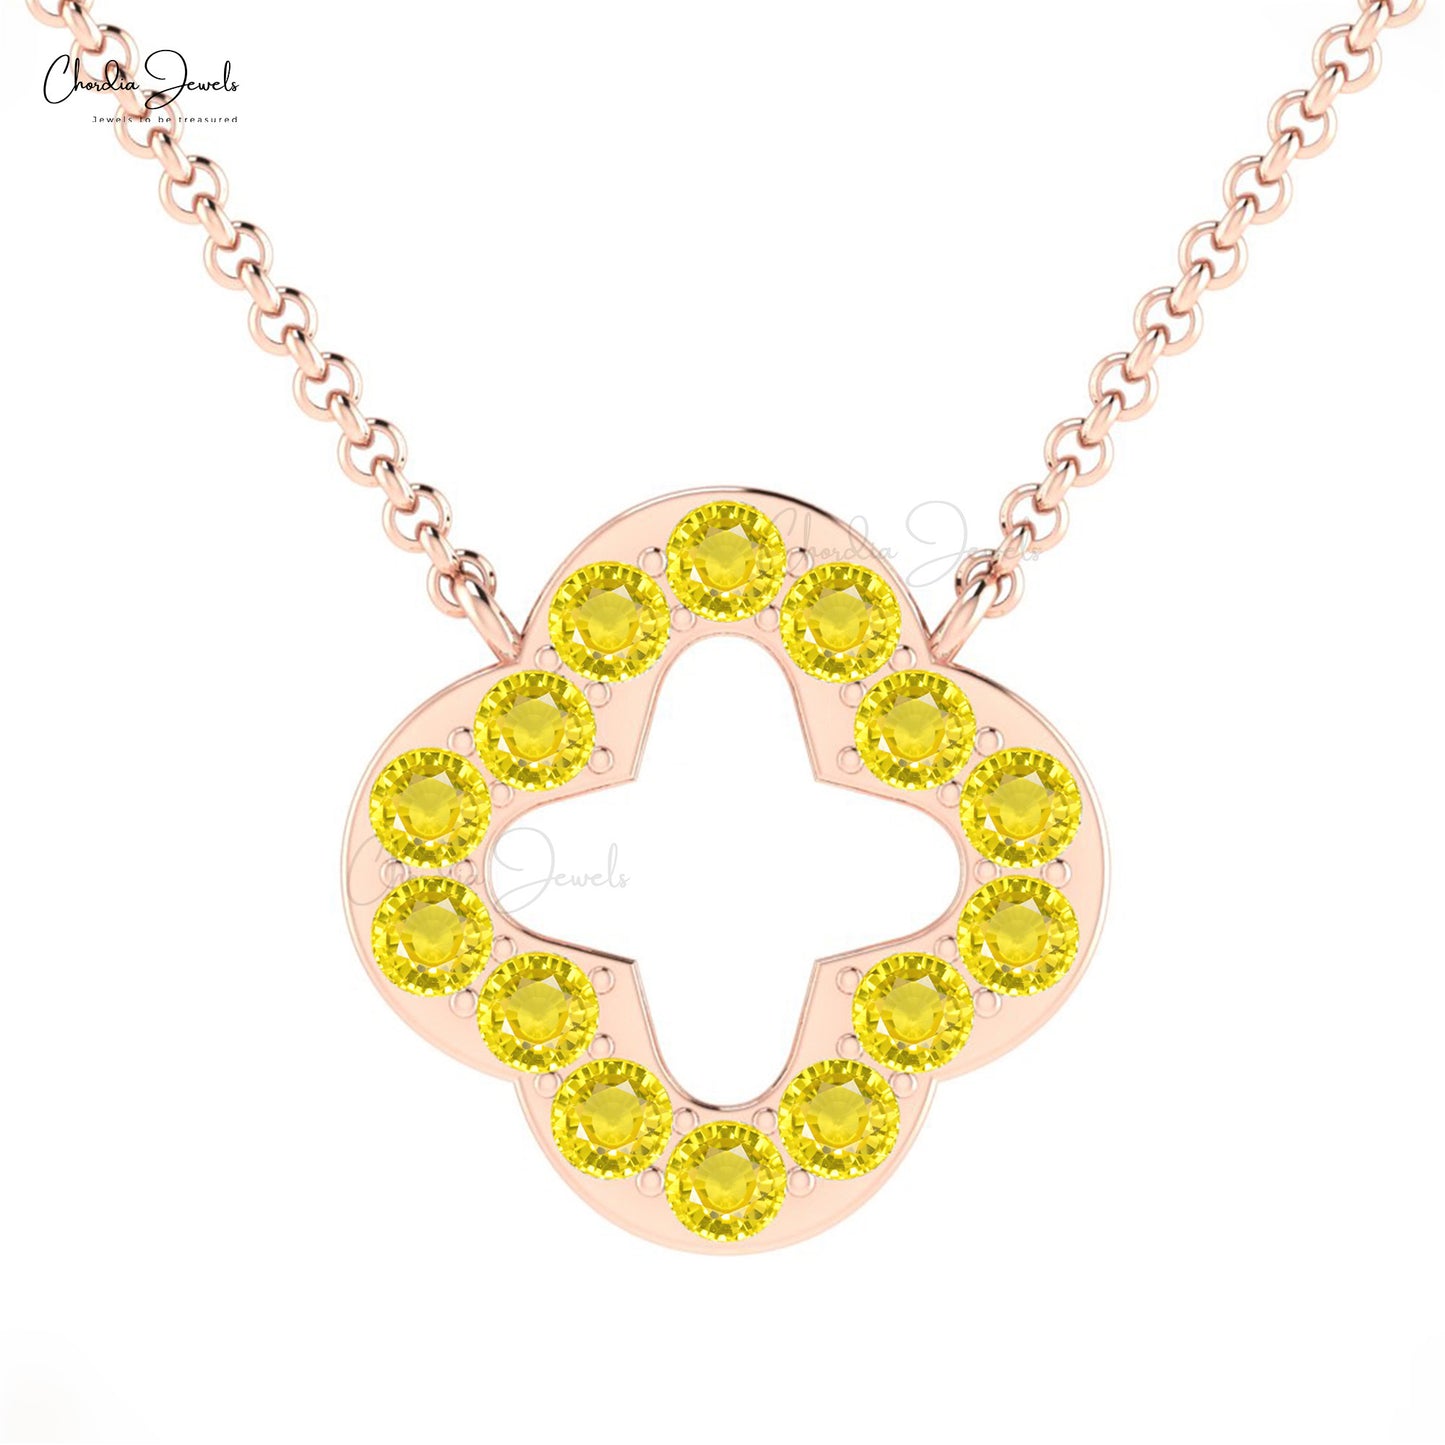 Load image into Gallery viewer, Yellow Sapphire Open Clover Necklace
